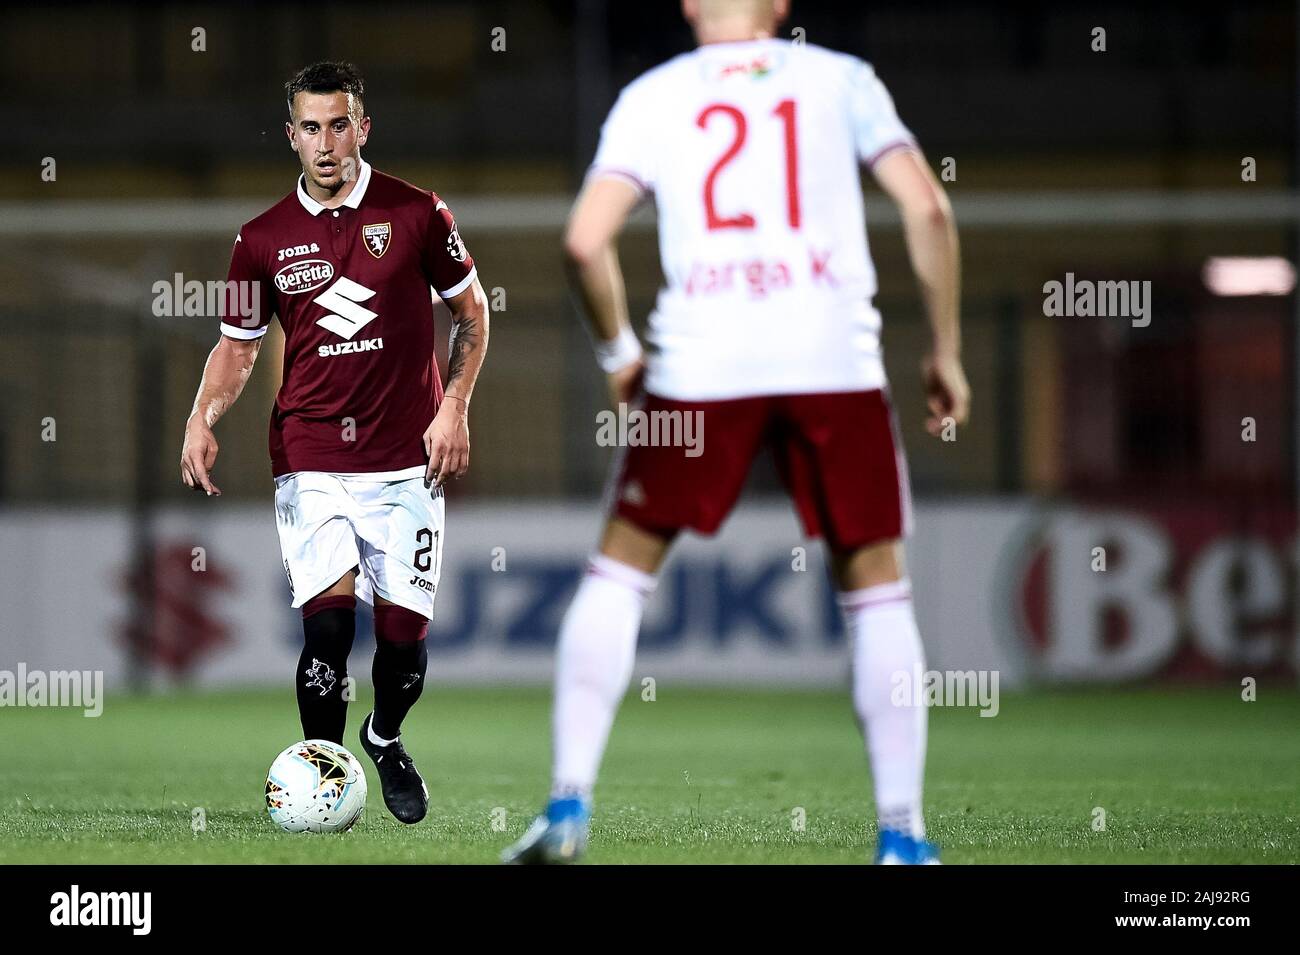 Alessandria, Italy. 25 July, 2019: Alejandro 'Alex' Berenguer of Torino FC in action during the UEFA Europa League second qualifying round football match between Torino FC and Debrecen VSC. Torino FC won 3-0 over Debrecen VSC. Credit: Nicolò Campo/Alamy Live New Stock Photo